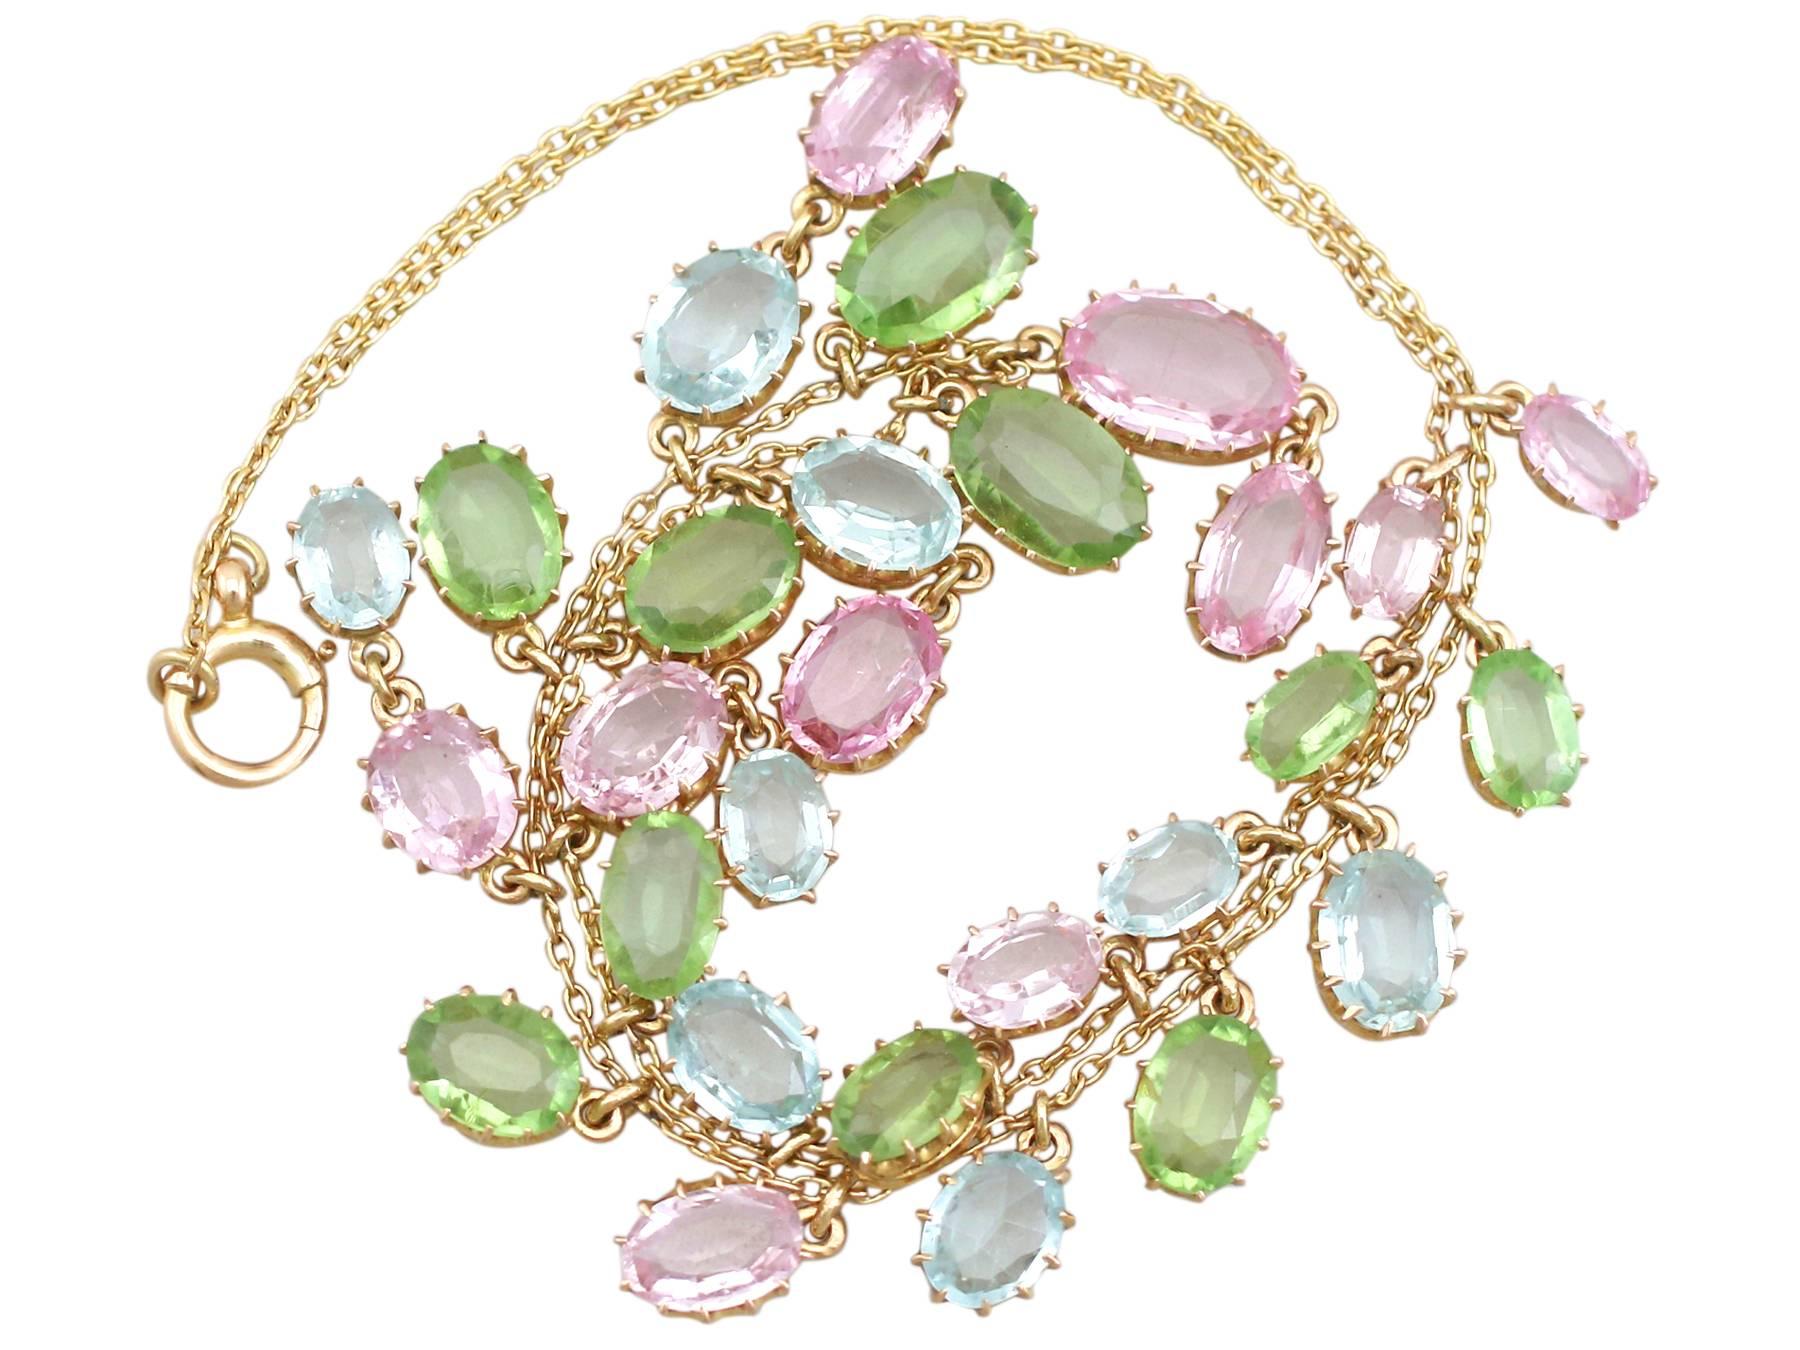 A stunning antique 25.87 carat (total) rose quartz, peridot and aquamarine, 18 ct and 10 ct yellow gold necklace; part of our diverse antique jewellery collections.

This stunning, fine and impressive antique multi gem necklace has been crafted in